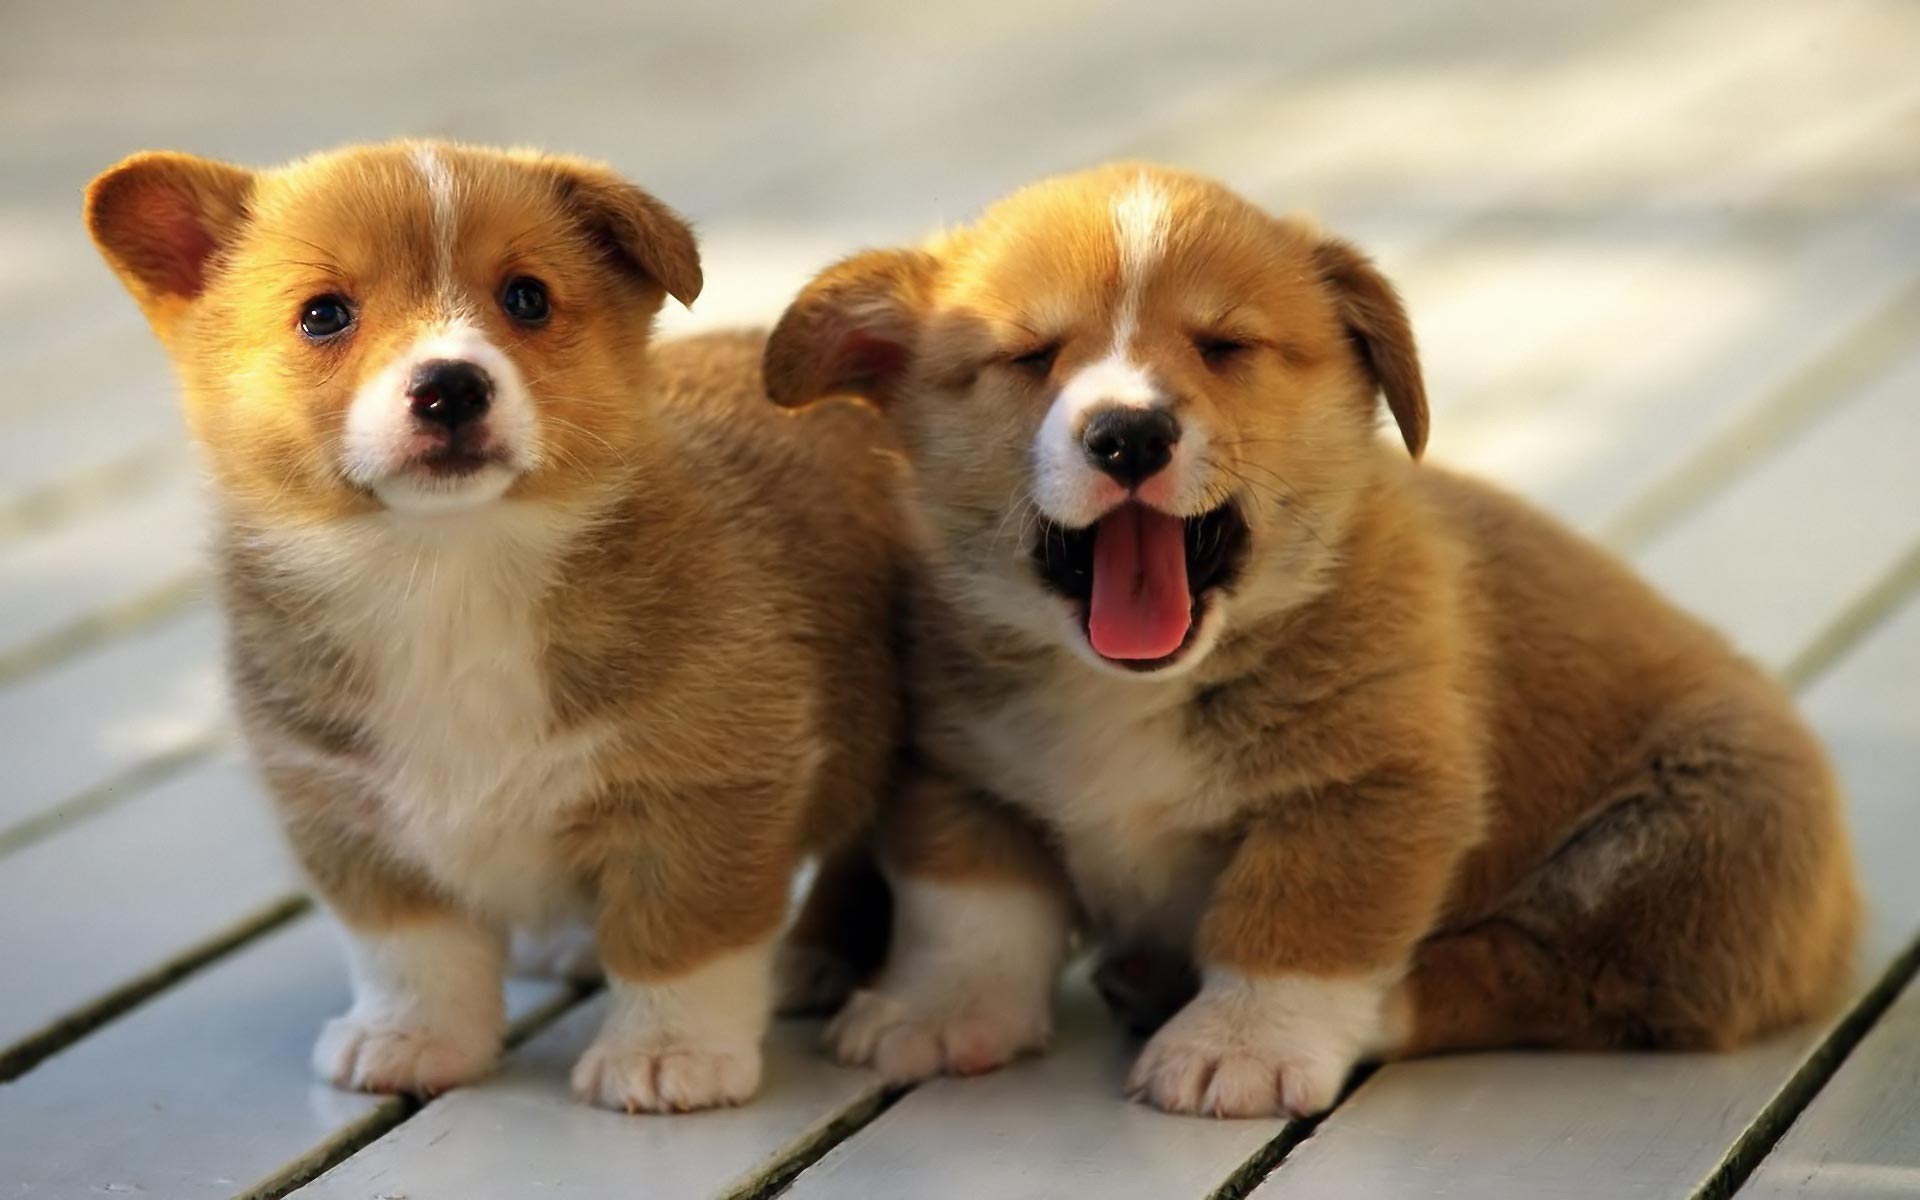 10 Things No One Tells You About Getting A Puppy | In a Nutshell